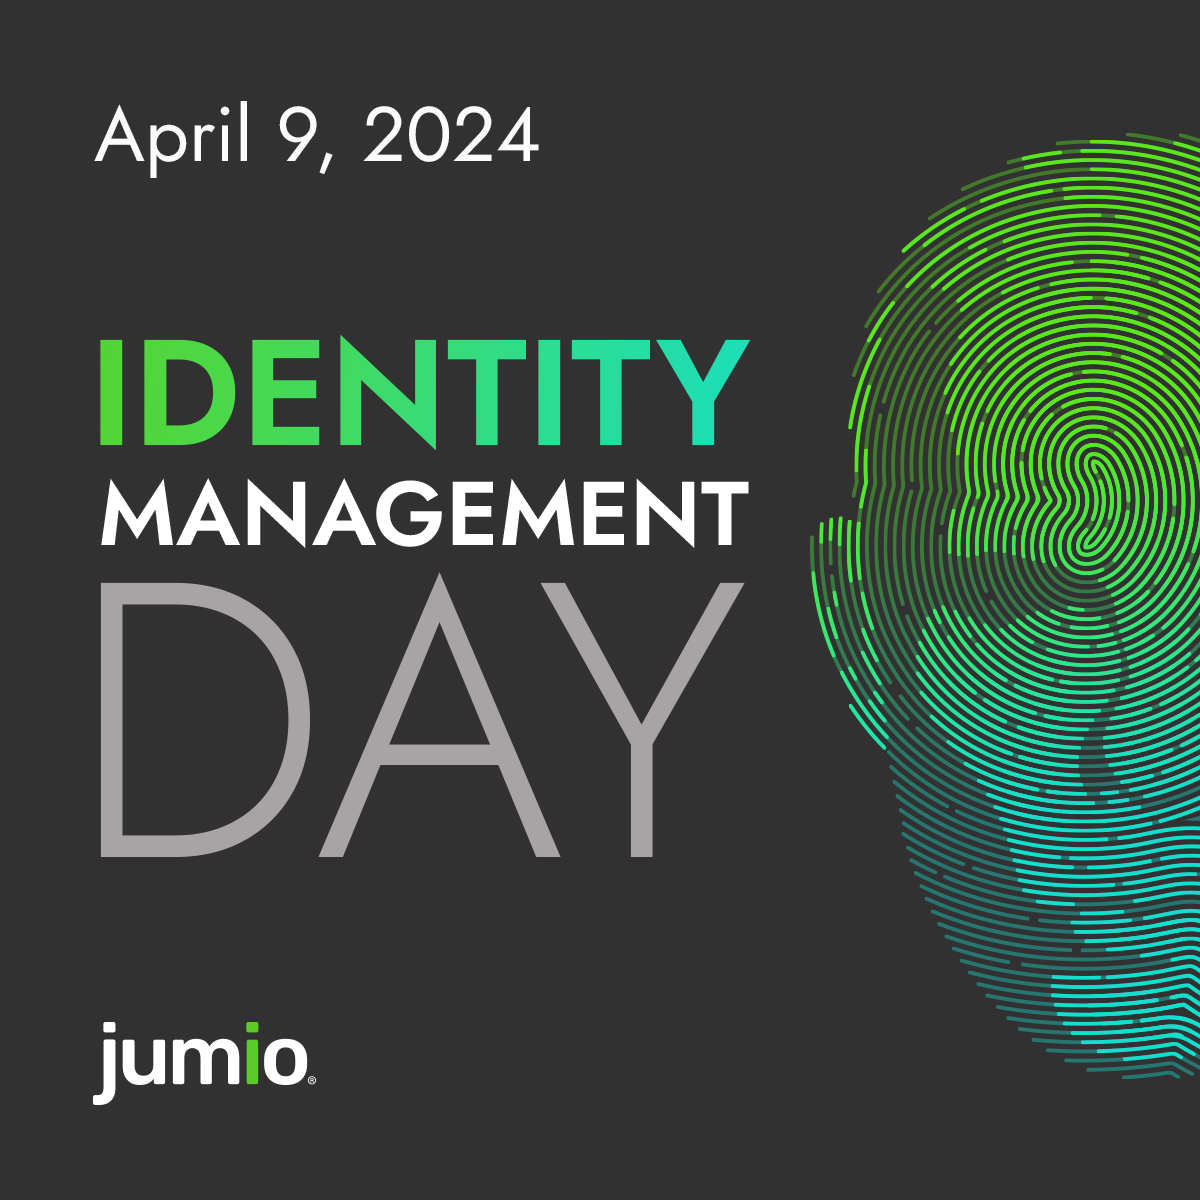 “Businesses have a responsibility to protect themselves and their customers with robust defenses, or risk paying the price.” Read more #IdentityManagementDay commentary from Jumio CPO Bala Kumar via @vmblog: vmblog.com/archive/2024/0…